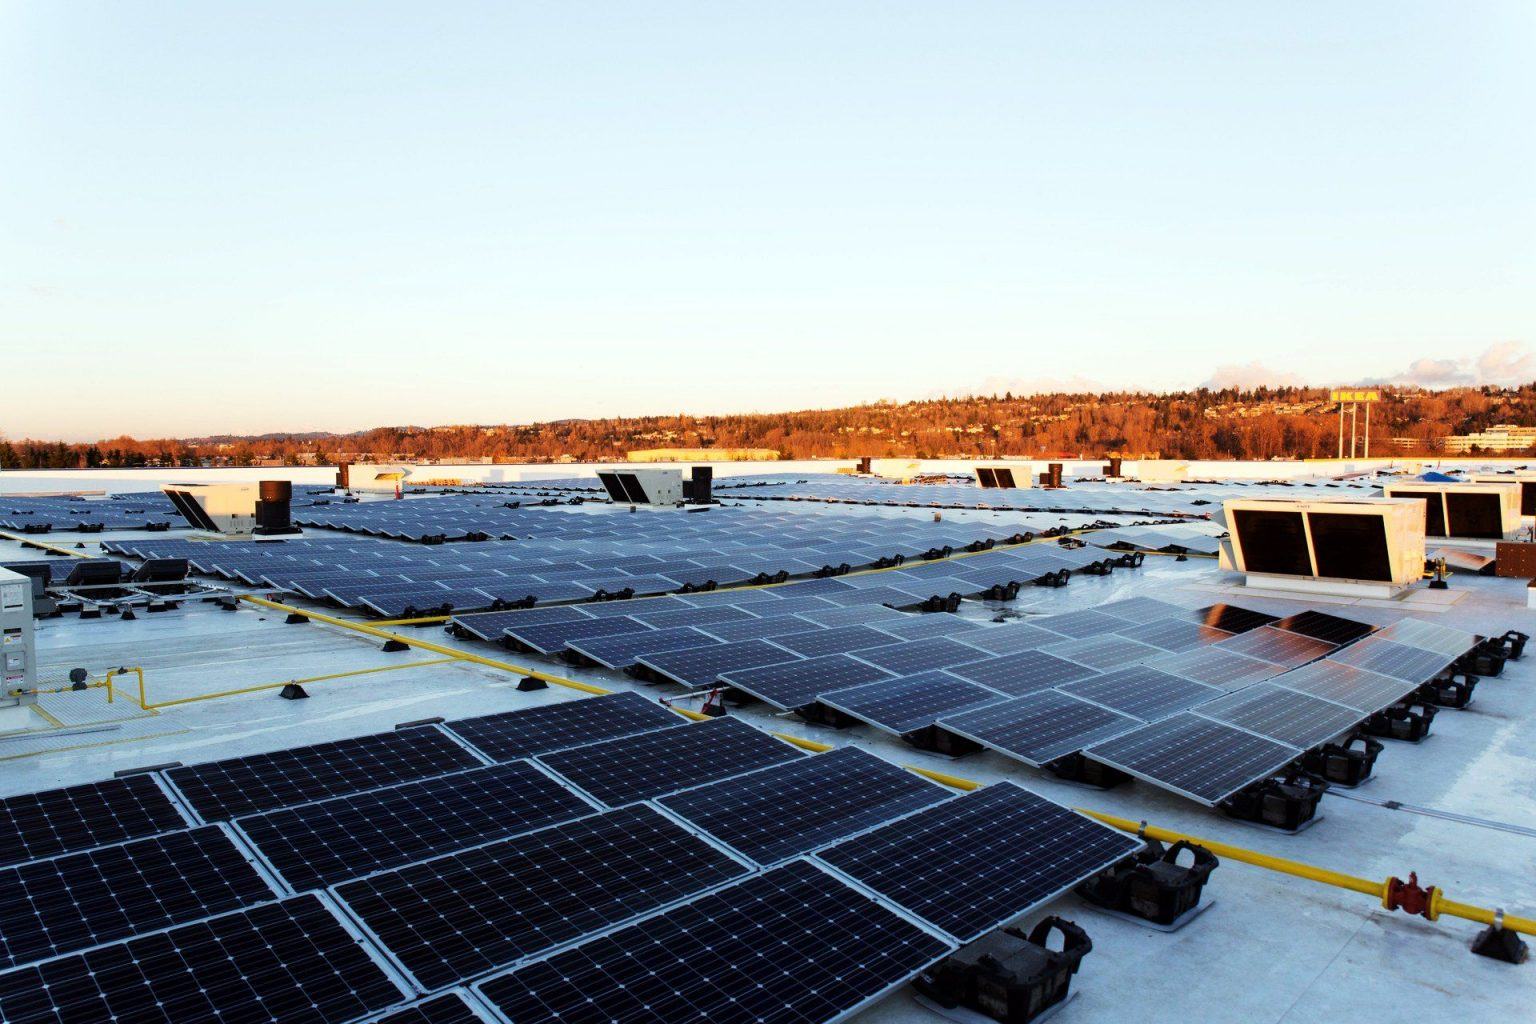 A photovoltaic system on the top of an IKEA store in Renton, Washington, delivering 1.2 MW